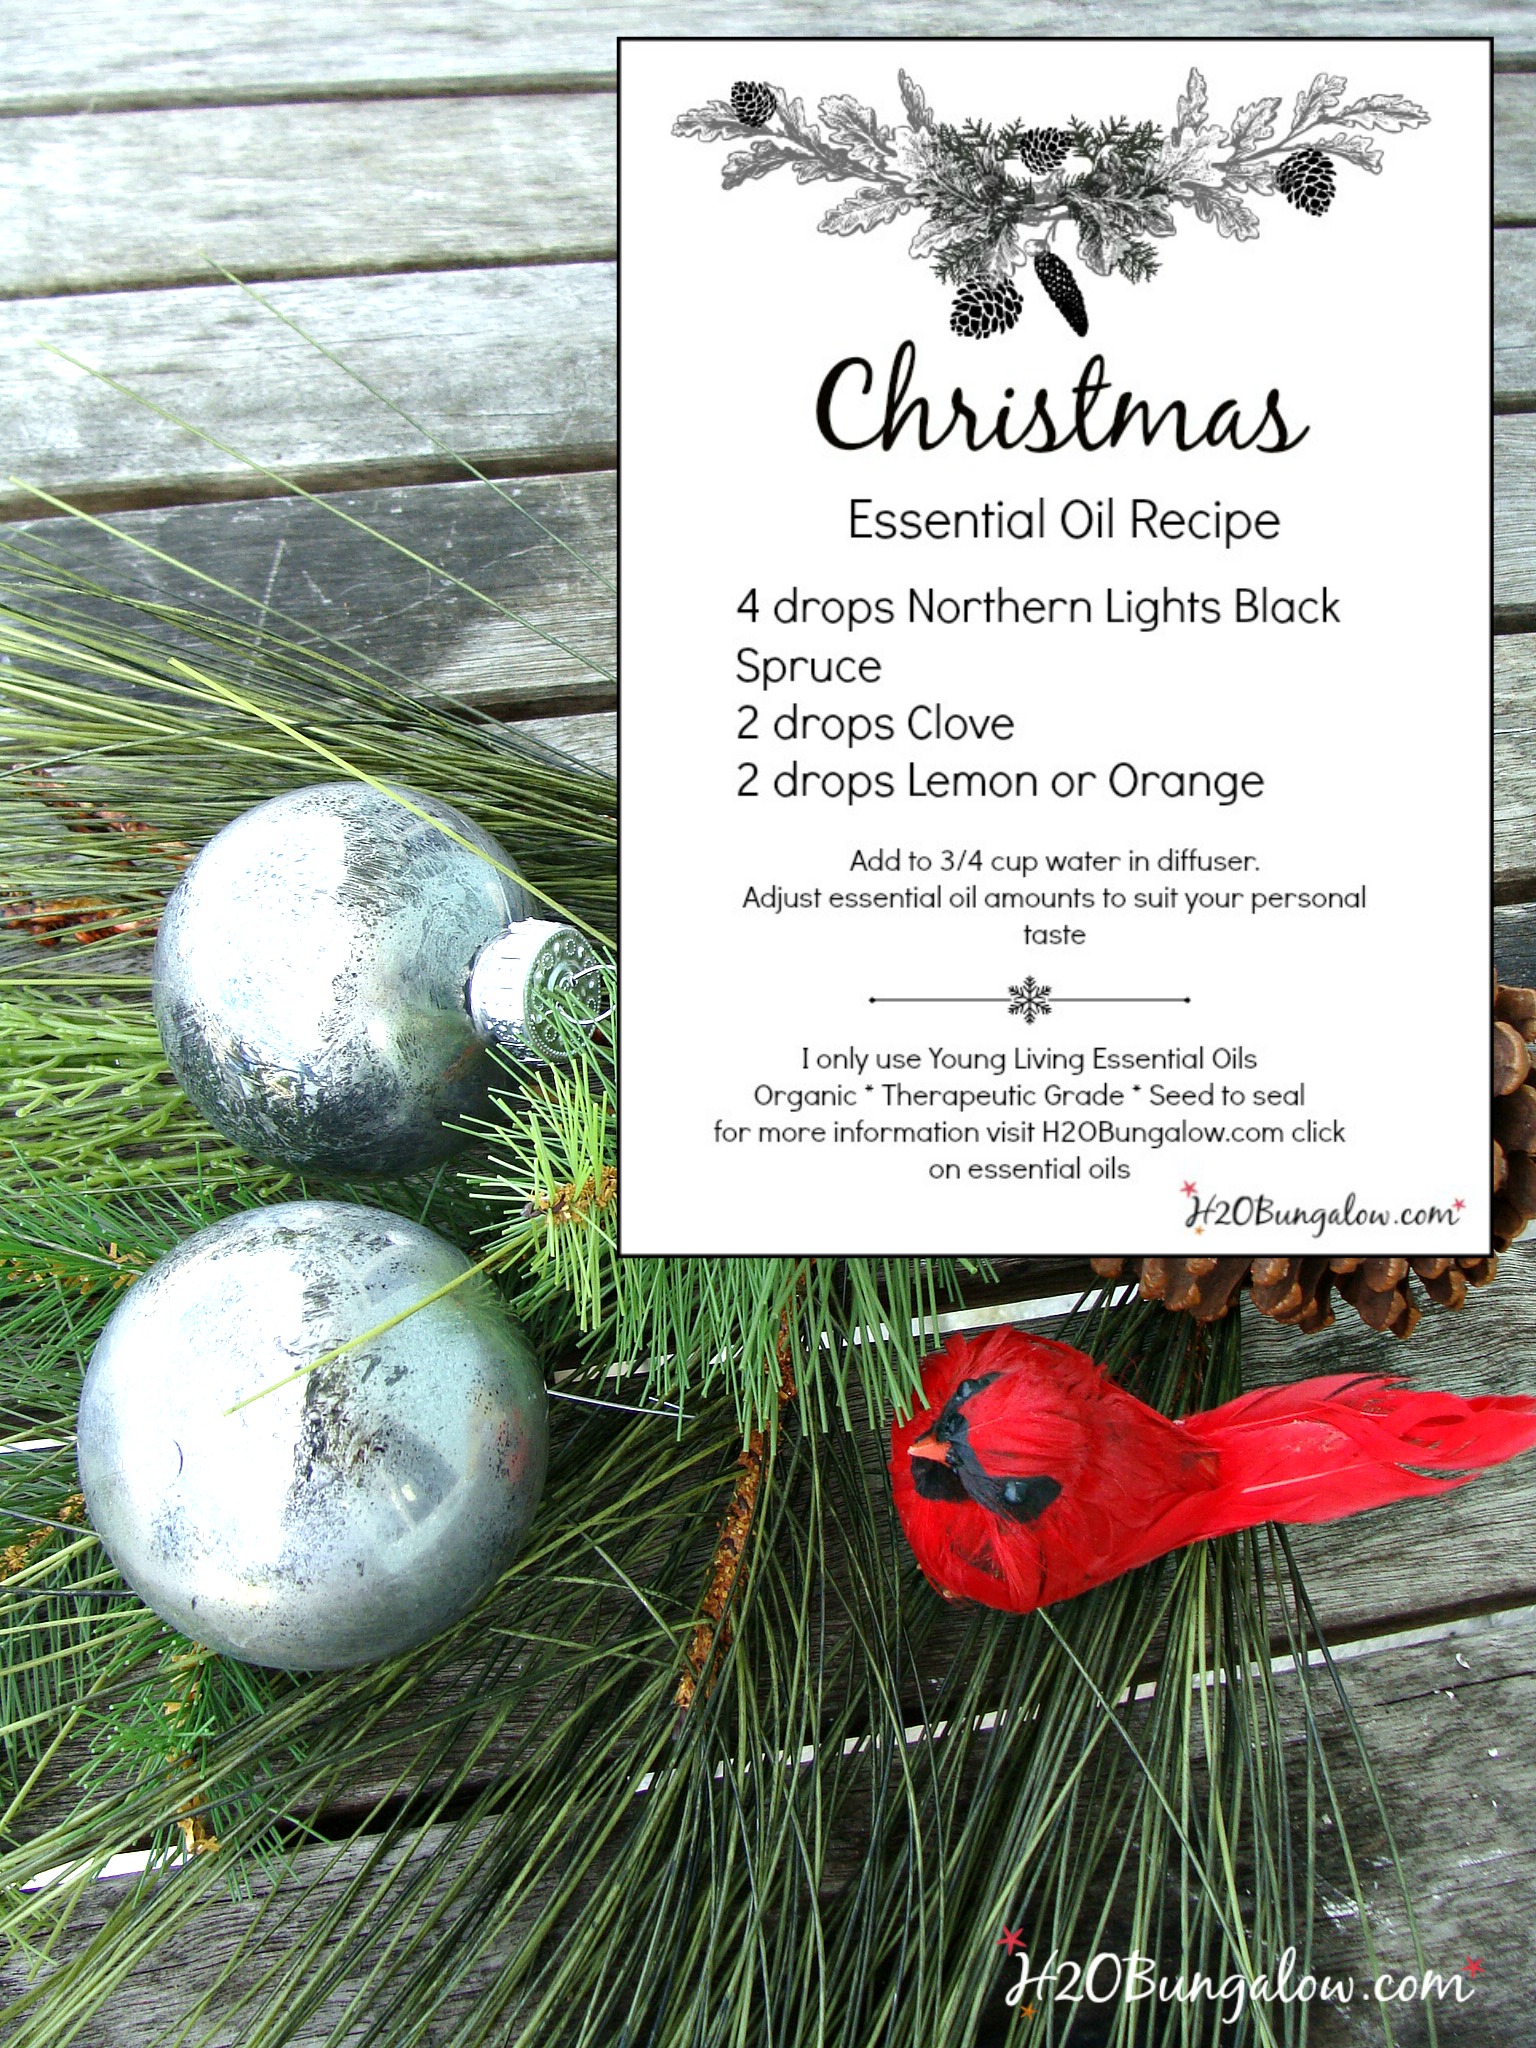 Nothing makes a room feel like the holidays better than the inviting scents of this Christmas essential oils recipe. Be sure to stop by and download your free copy of the recipe at www.H2OBungalow.com 